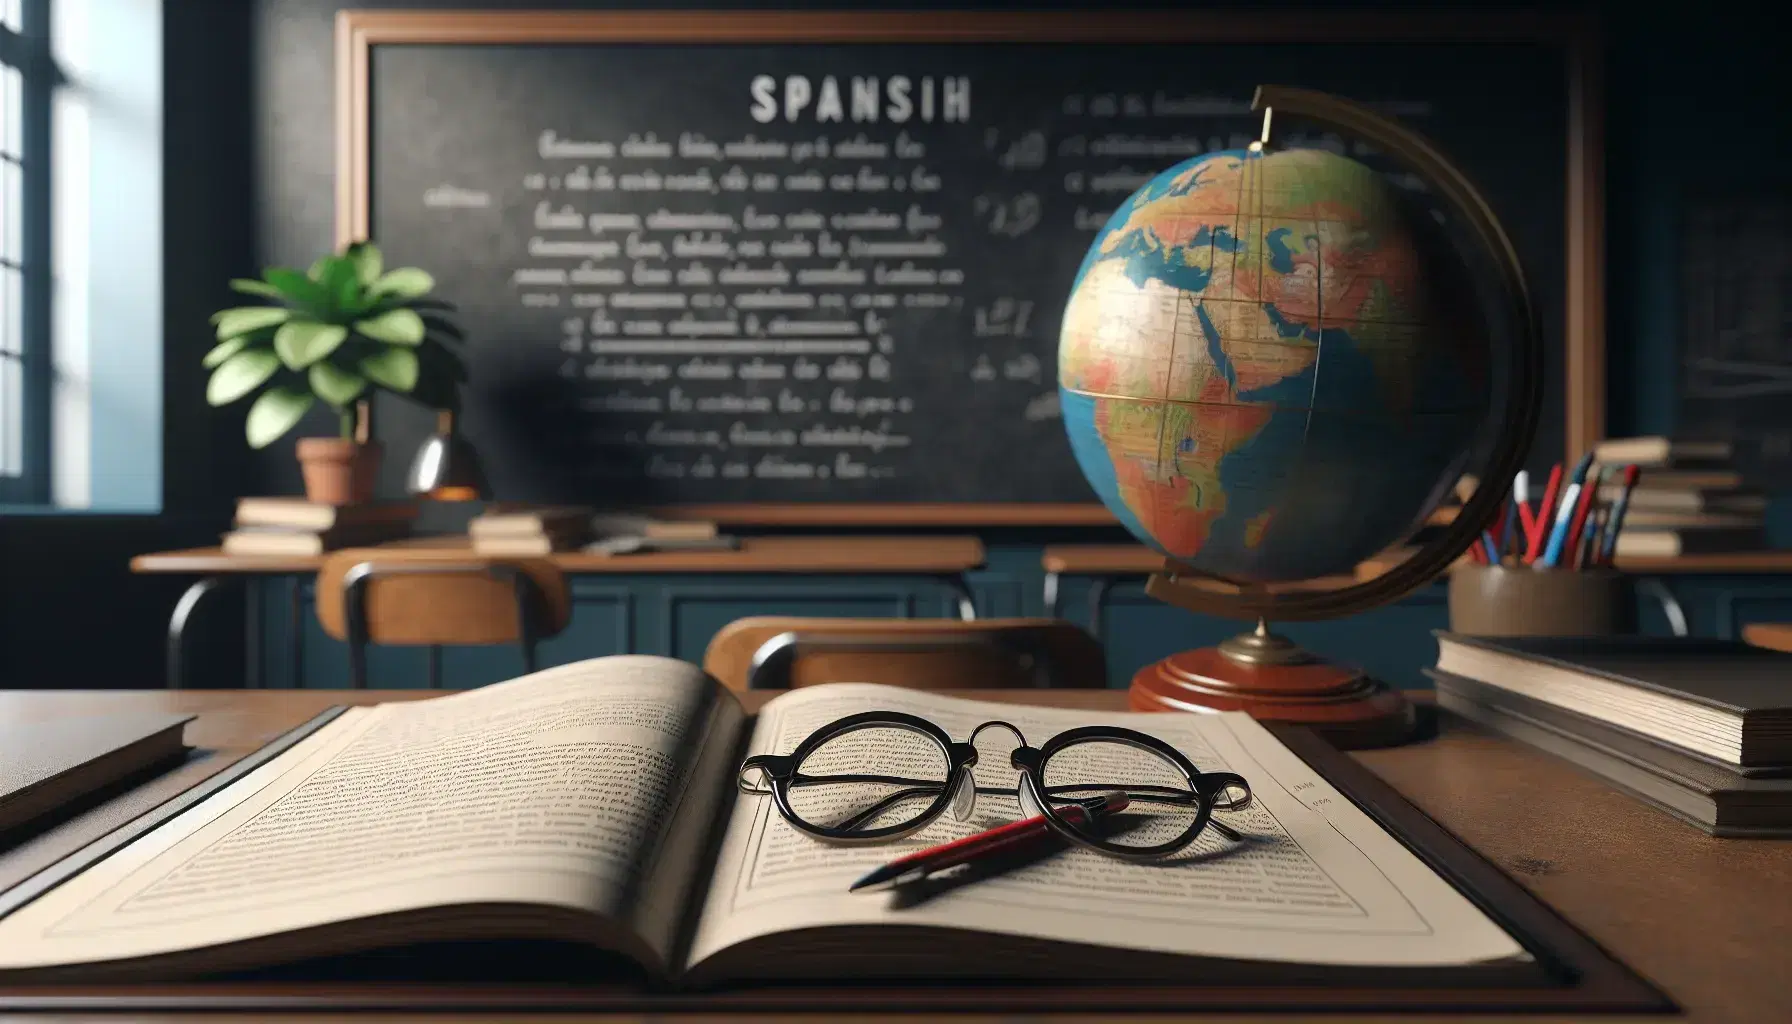 Spanish classroom with teacher's desk, open textbook, eyeglasses, red pen, clean chalkboard, globe, and potted plant on a checkerboard floor.